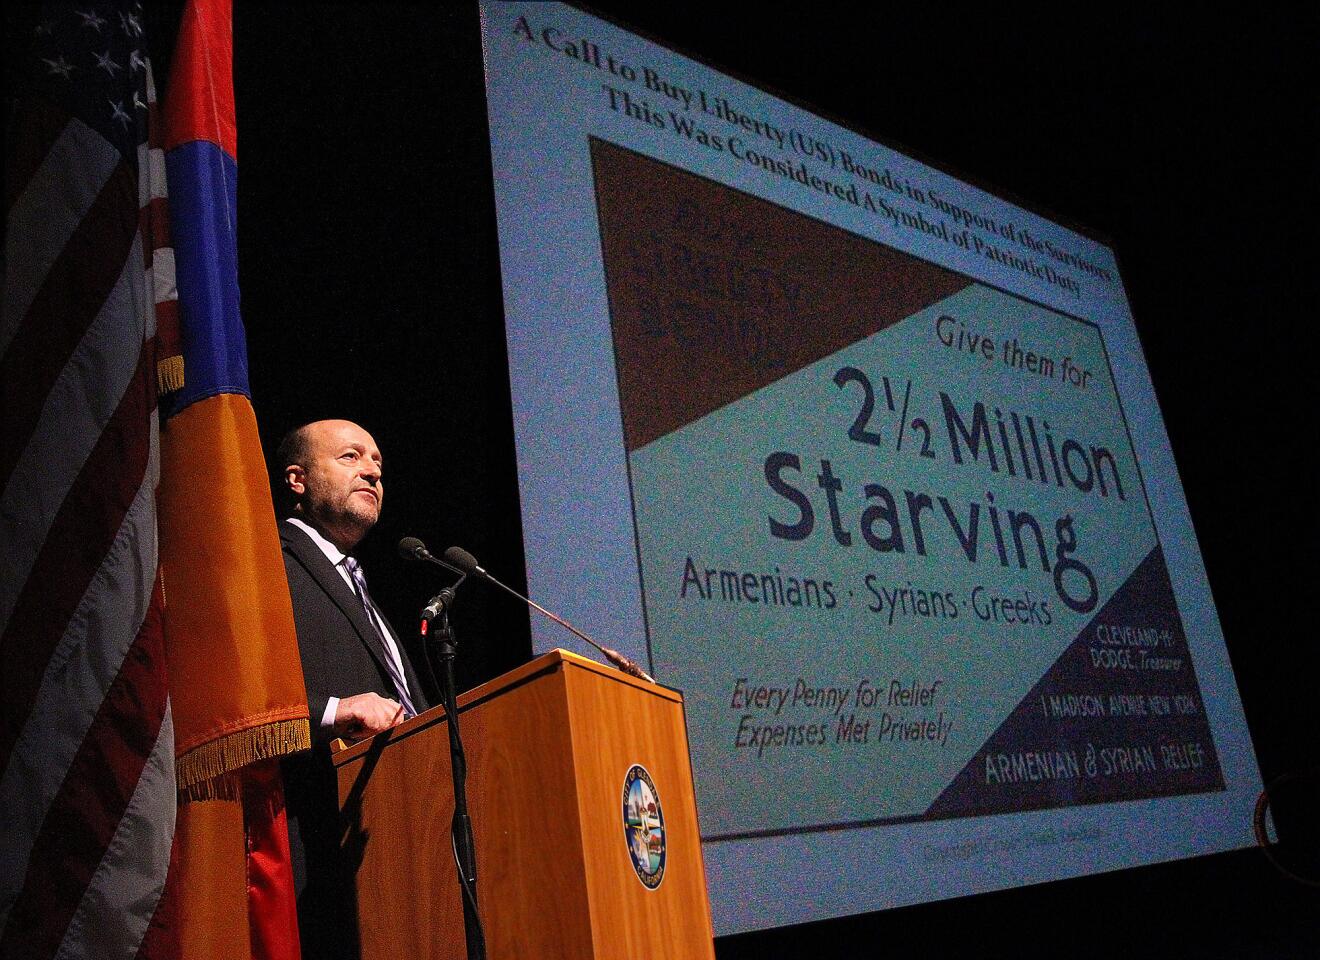 Speaker Maurice Missak Kelechian demonstrates the American involvement in the relief efforts to the plight of the Armenians during the time of the genocide at the City of Glendale's 13th Annual Commemoration of the Armenian Genocide at the Alex Theatre in Glendale on Thursday, April 24, 2014.